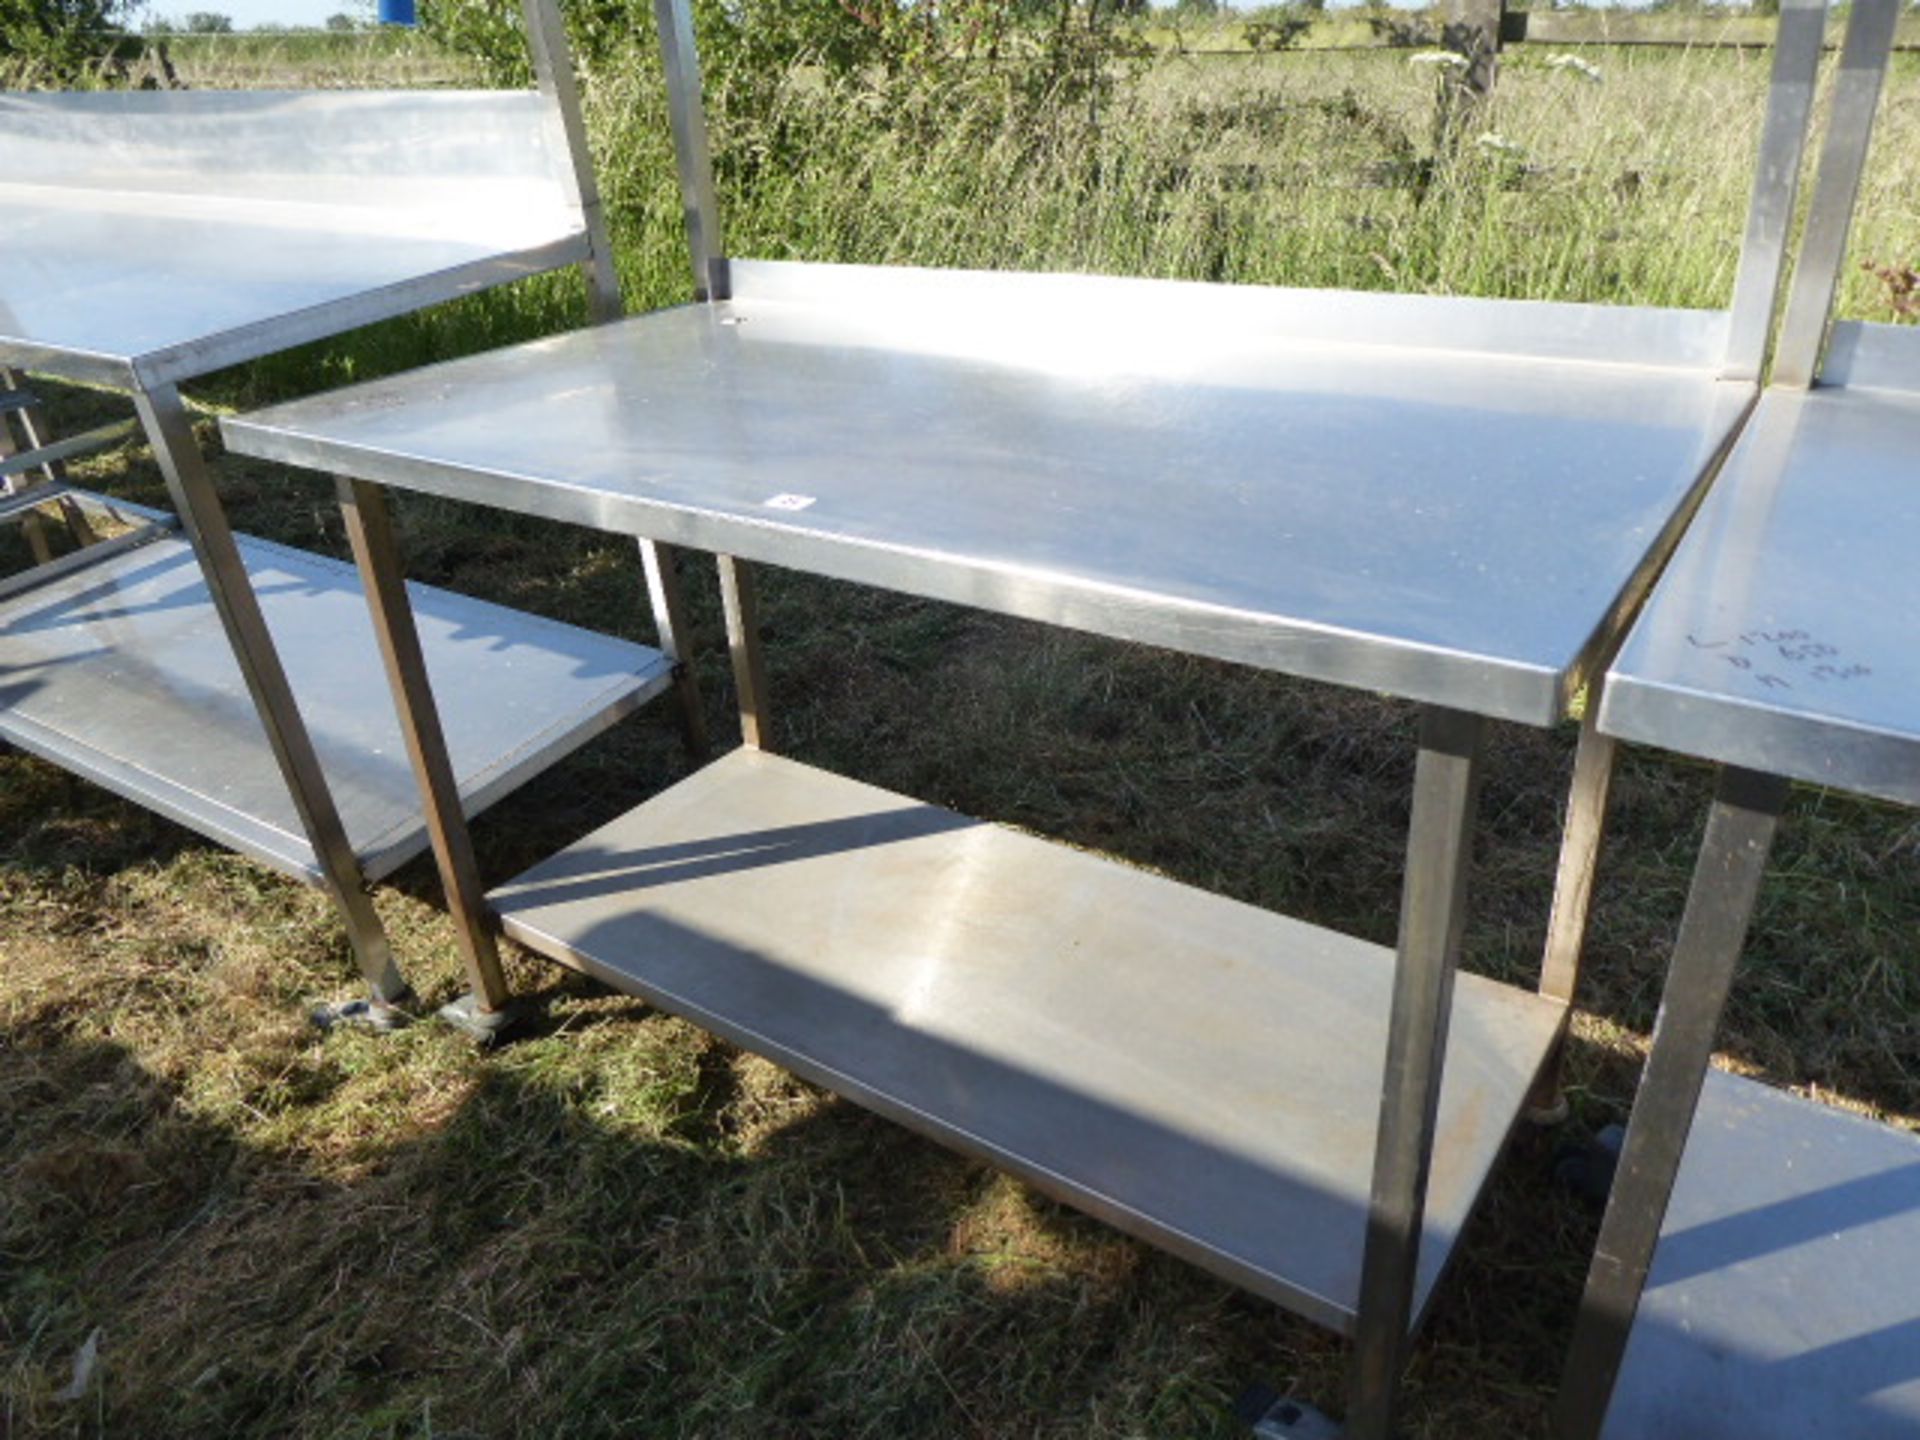 Stainless steel mobile food preparation station with a sloped shelf for Gastronorm pots and shelf - Image 2 of 2